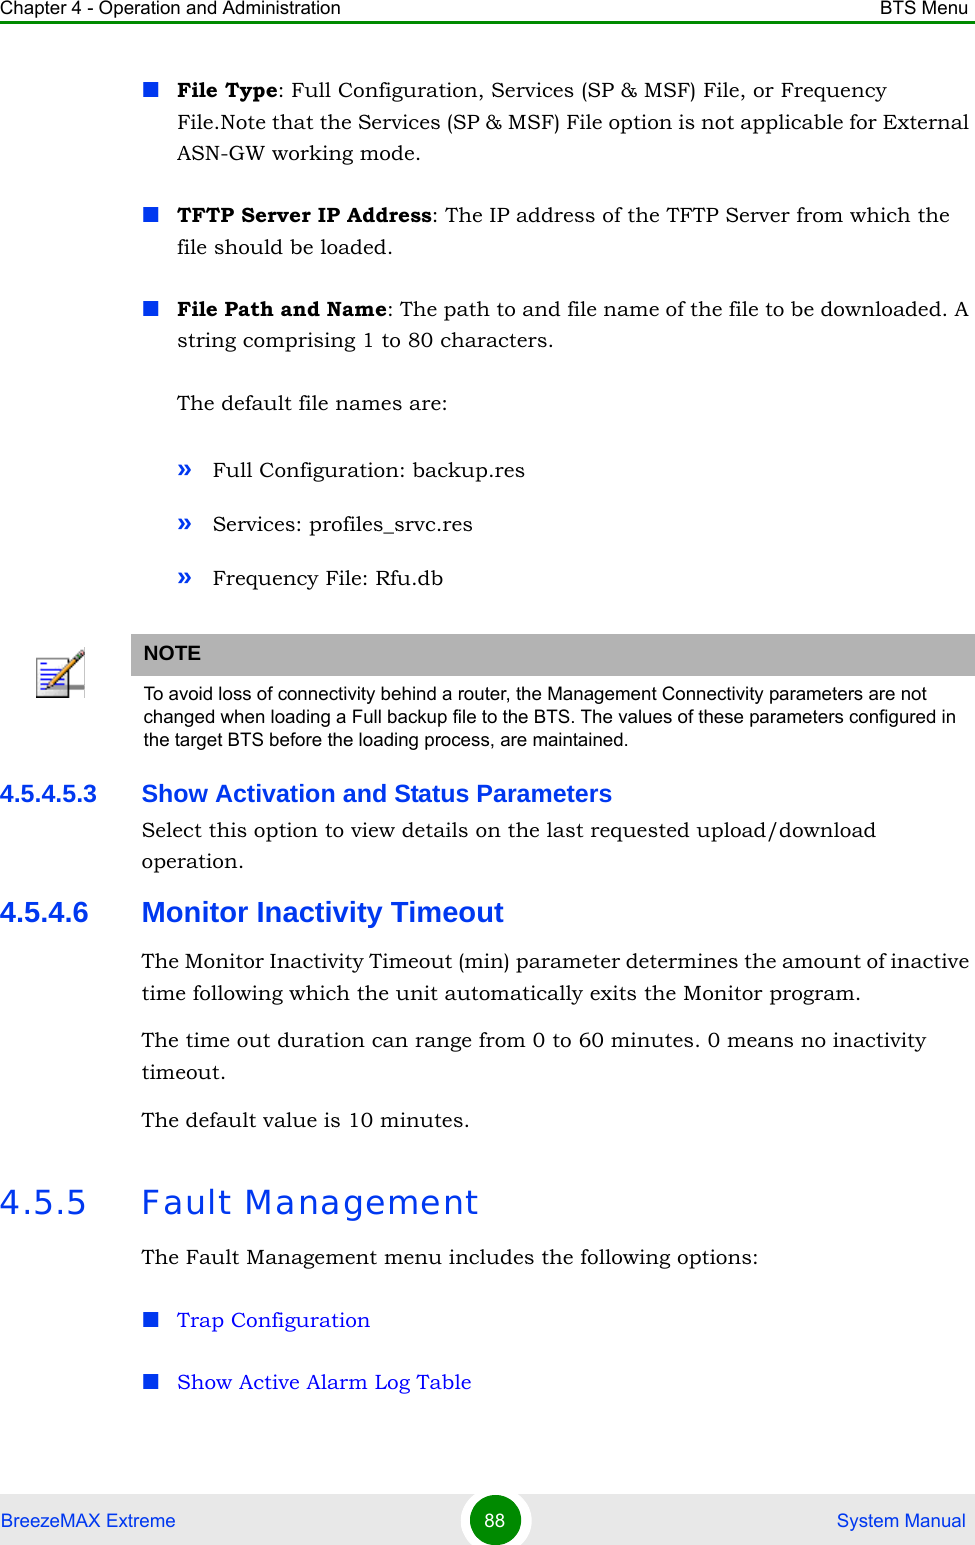 Chapter 4 - Operation and Administration BTS MenuBreezeMAX Extreme 88  System ManualFile Type: Full Configuration, Services (SP &amp; MSF) File, or Frequency File.Note that the Services (SP &amp; MSF) File option is not applicable for External ASN-GW working mode.TFTP Server IP Address: The IP address of the TFTP Server from which the file should be loaded.File Path and Name: The path to and file name of the file to be downloaded. A string comprising 1 to 80 characters.The default file names are: »Full Configuration: backup.res»Services: profiles_srvc.res»Frequency File: Rfu.db4.5.4.5.3 Show Activation and Status ParametersSelect this option to view details on the last requested upload/download operation.4.5.4.6 Monitor Inactivity TimeoutThe Monitor Inactivity Timeout (min) parameter determines the amount of inactive time following which the unit automatically exits the Monitor program. The time out duration can range from 0 to 60 minutes. 0 means no inactivity timeout.The default value is 10 minutes.4.5.5 Fault ManagementThe Fault Management menu includes the following options:Trap ConfigurationShow Active Alarm Log TableNOTETo avoid loss of connectivity behind a router, the Management Connectivity parameters are not changed when loading a Full backup file to the BTS. The values of these parameters configured in the target BTS before the loading process, are maintained.